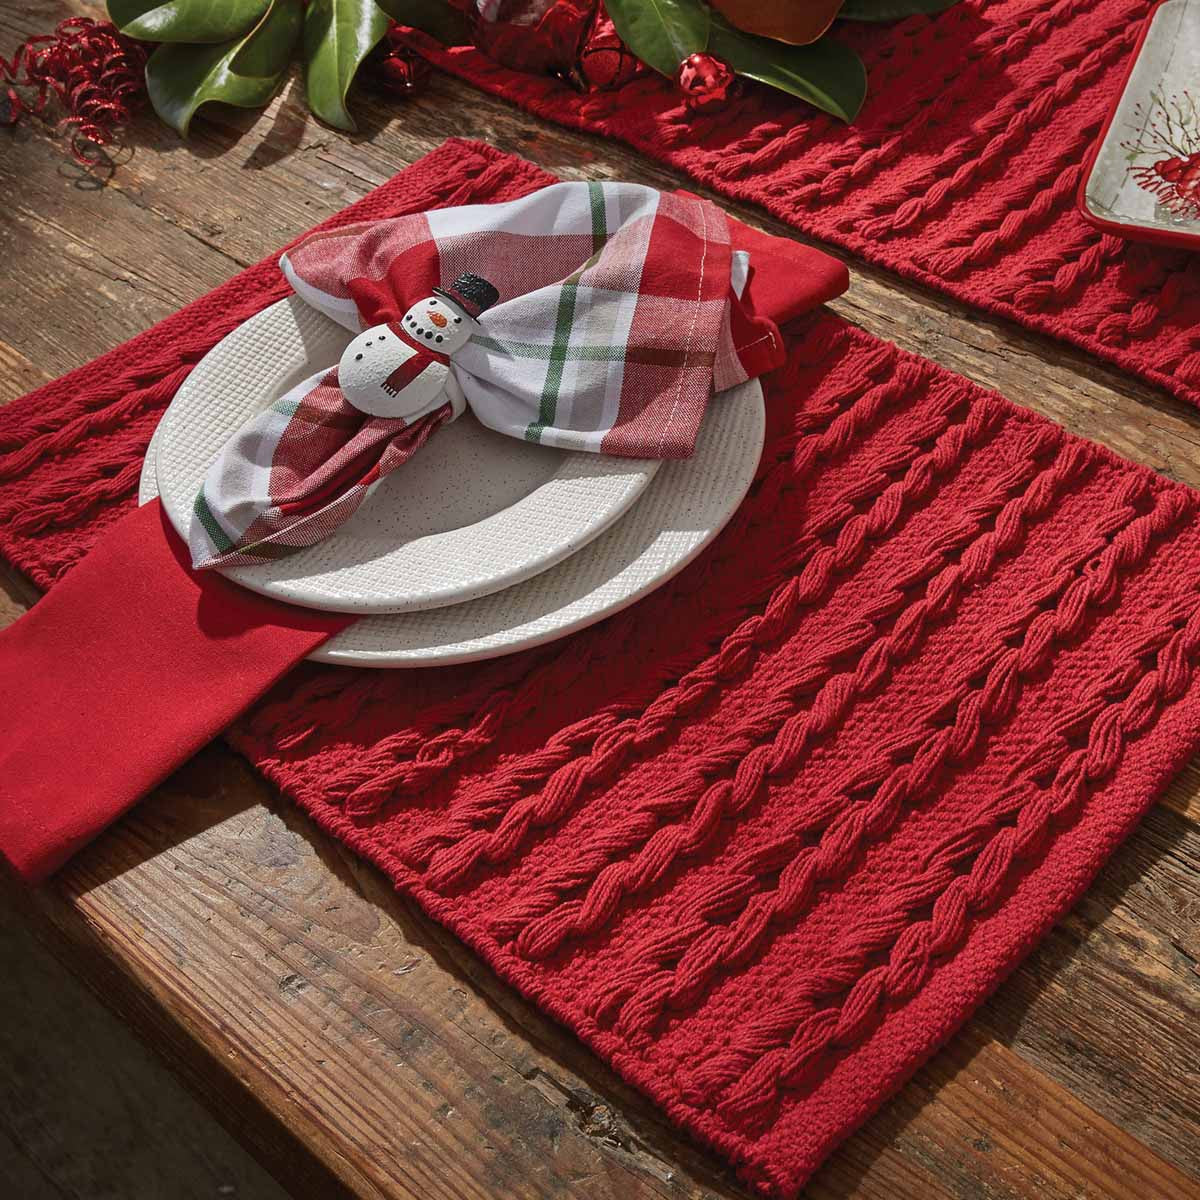 Winter Magic Placemats - Scarf Red  Set of 4 Park Designs